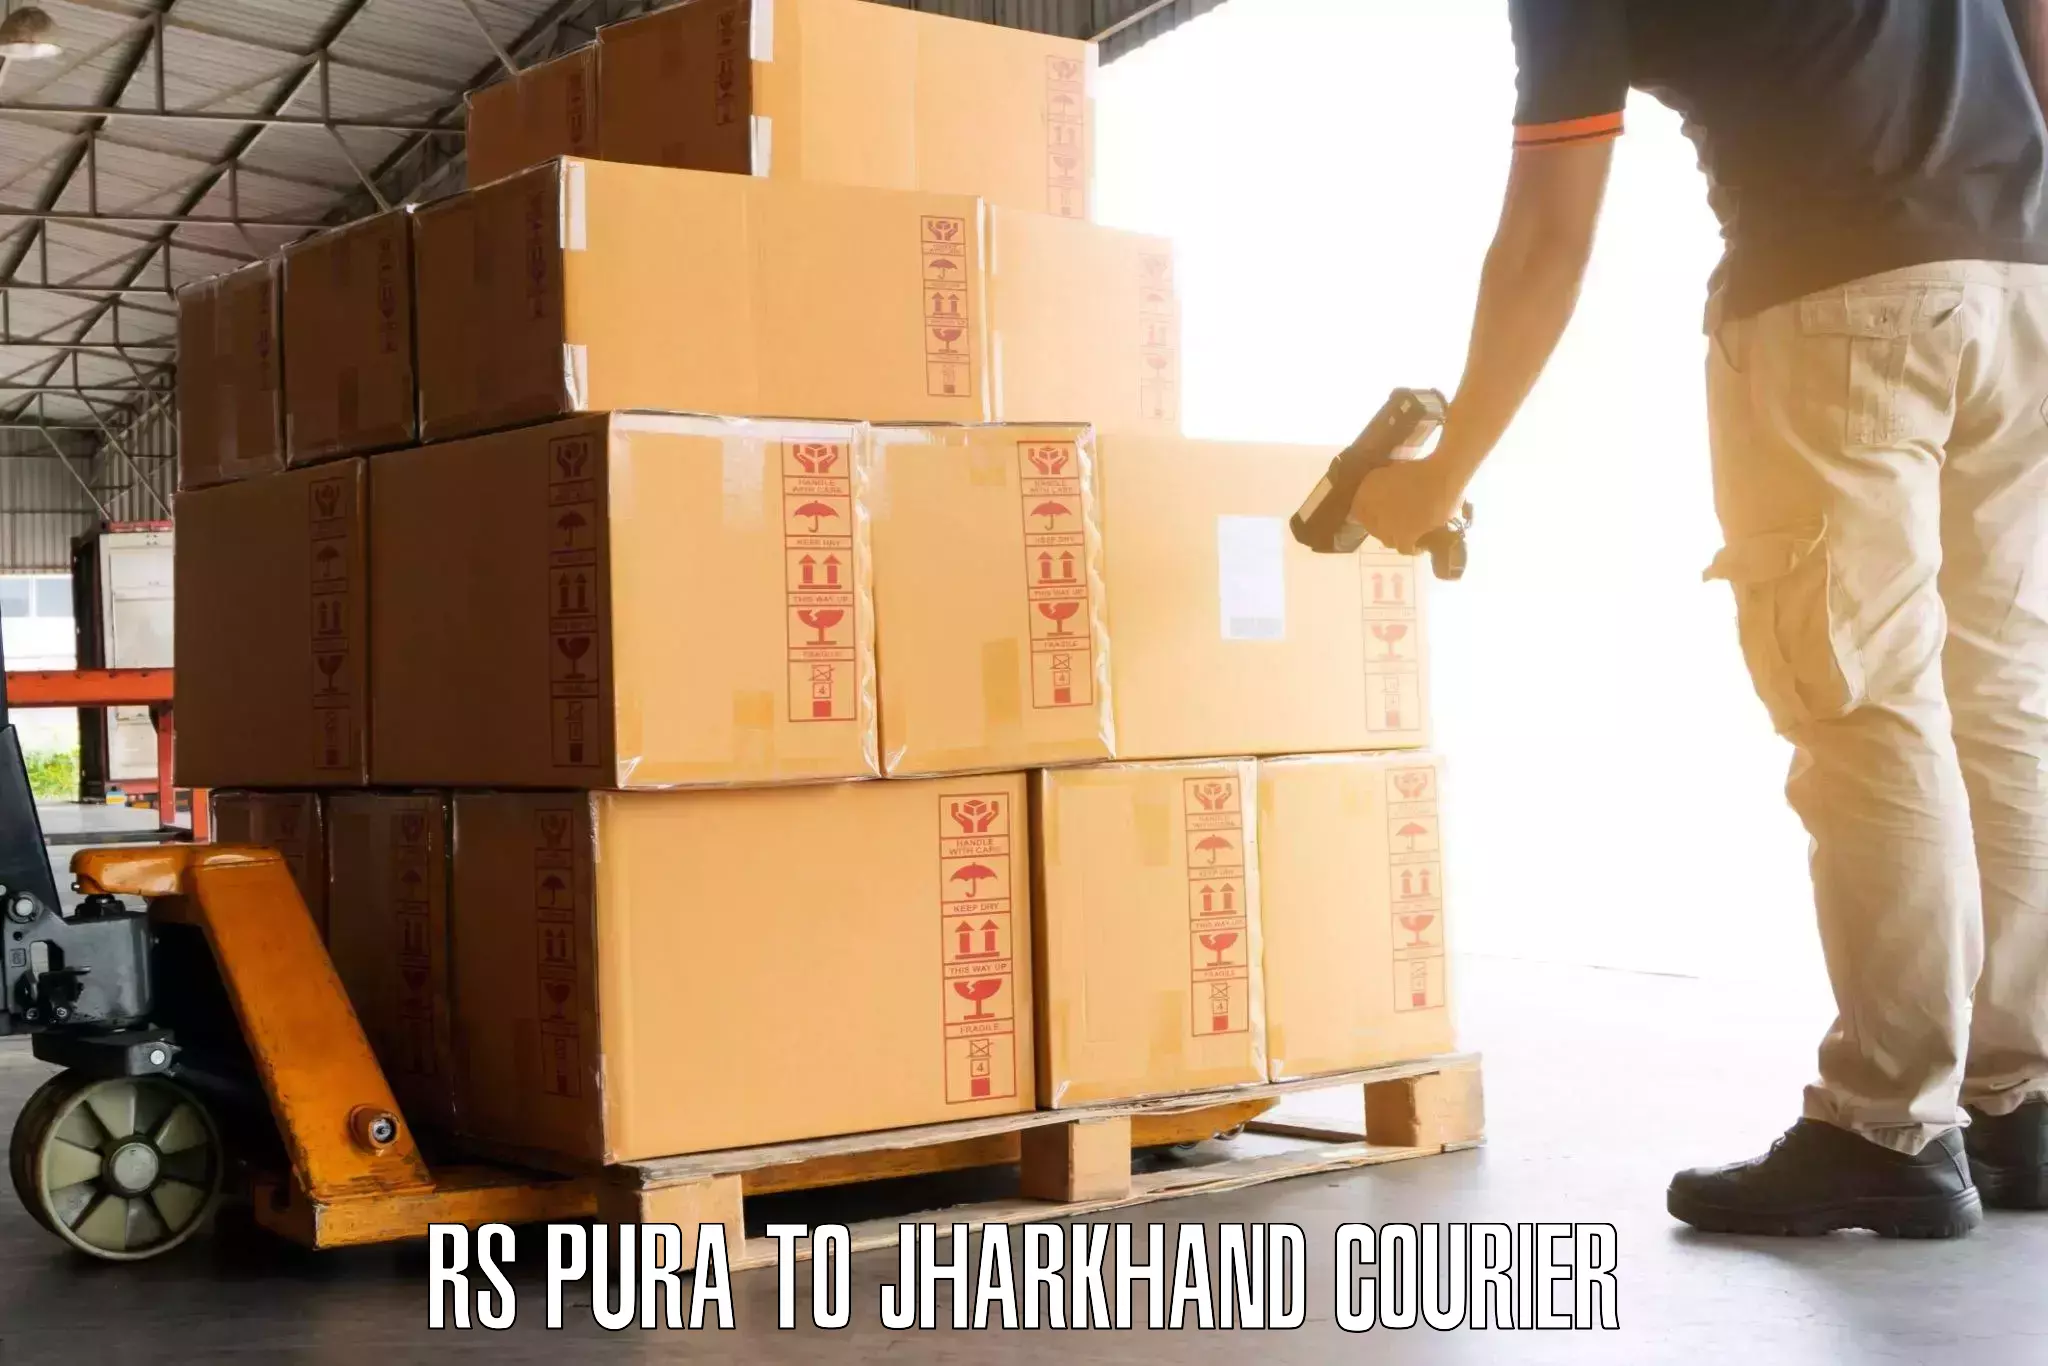 Online luggage shipping in RS Pura to Kedla